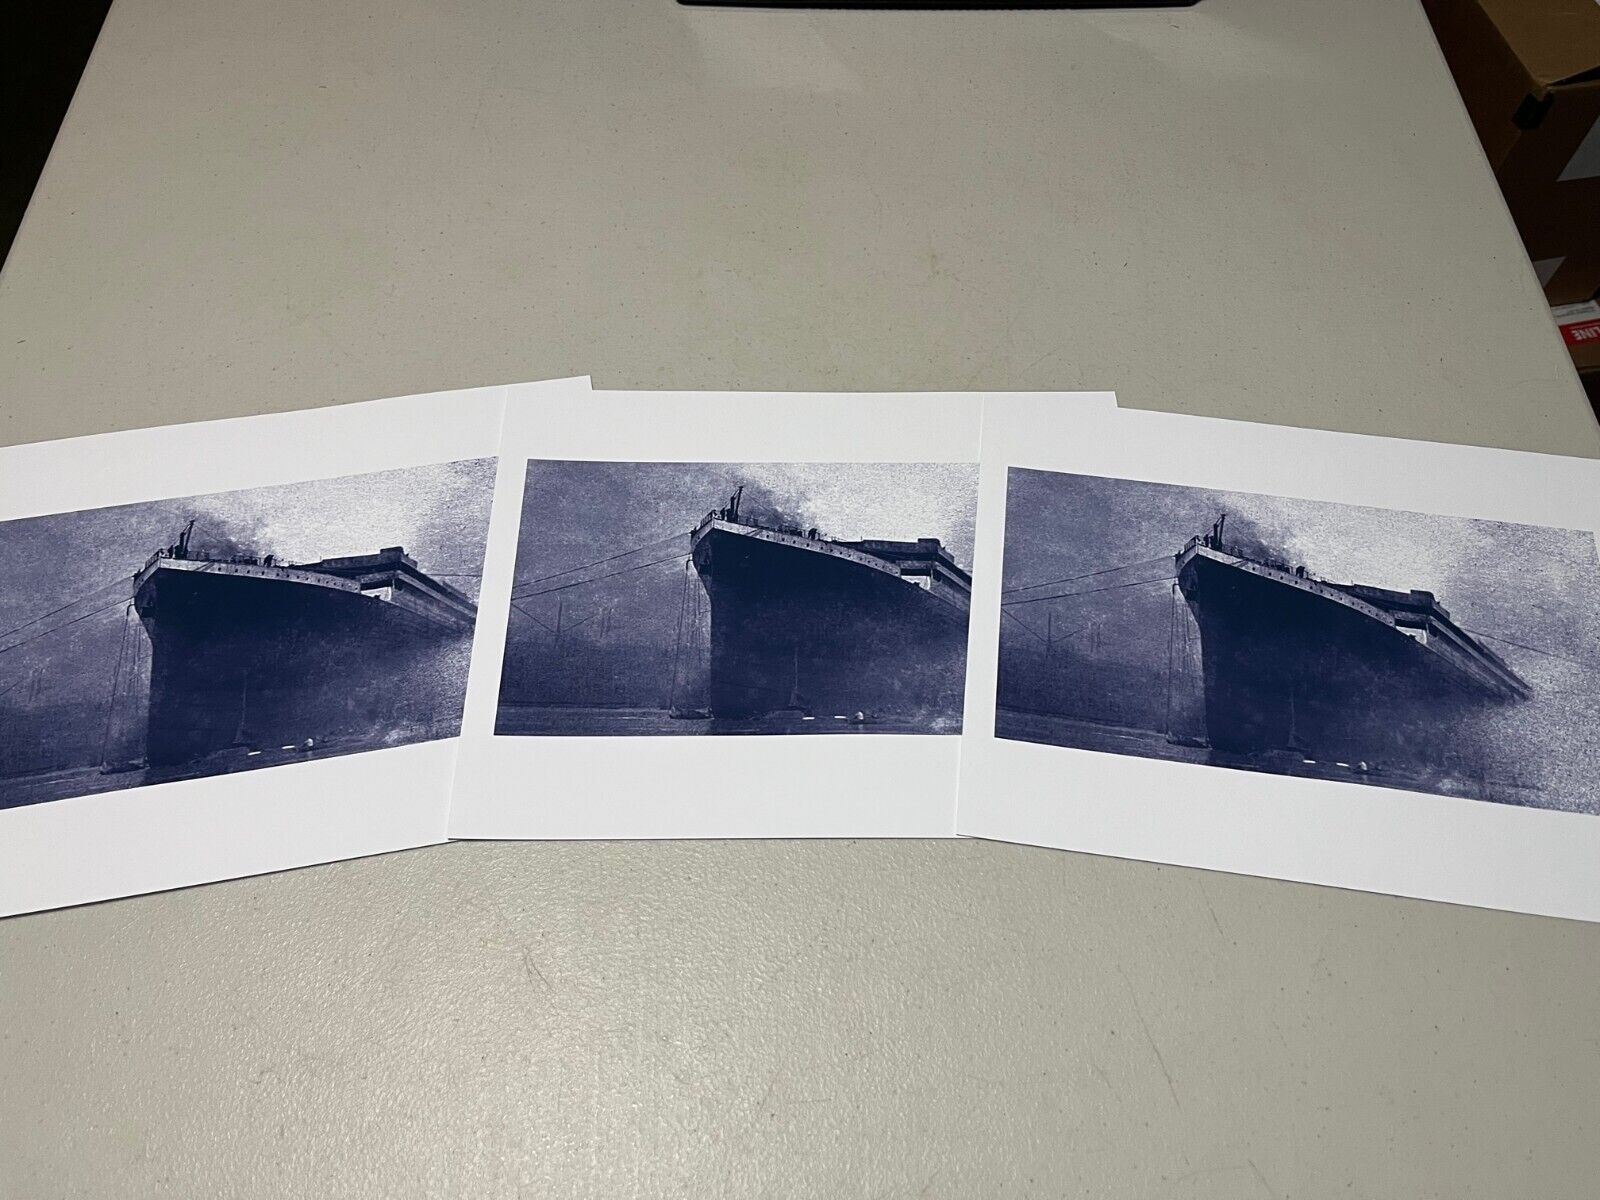 RMS TITANIC LAUNCH MAY 31, 1911, CLIMBING OUT OF THE MIST PHOTO REPRINT HQ PRINT Без бренда - фотография #4